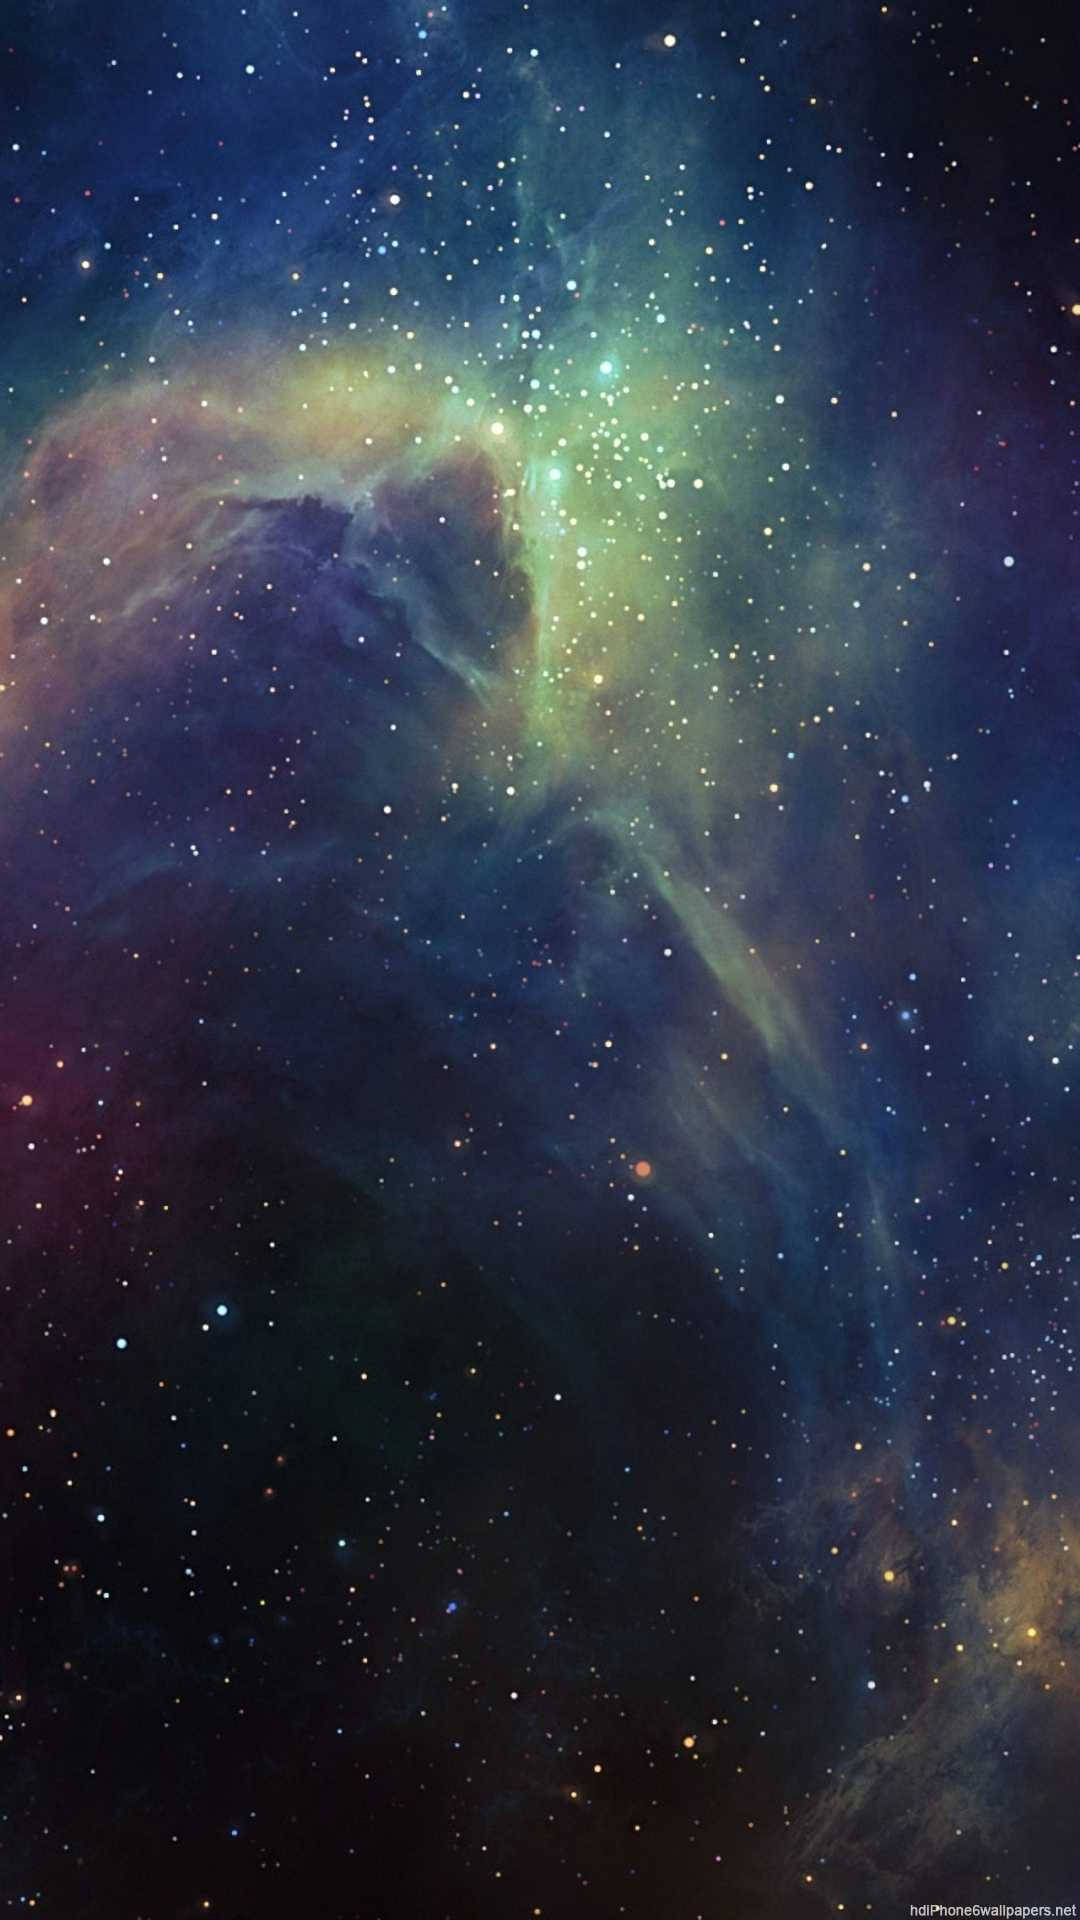 Go and Explore The Starry Night Sky Wallpaper